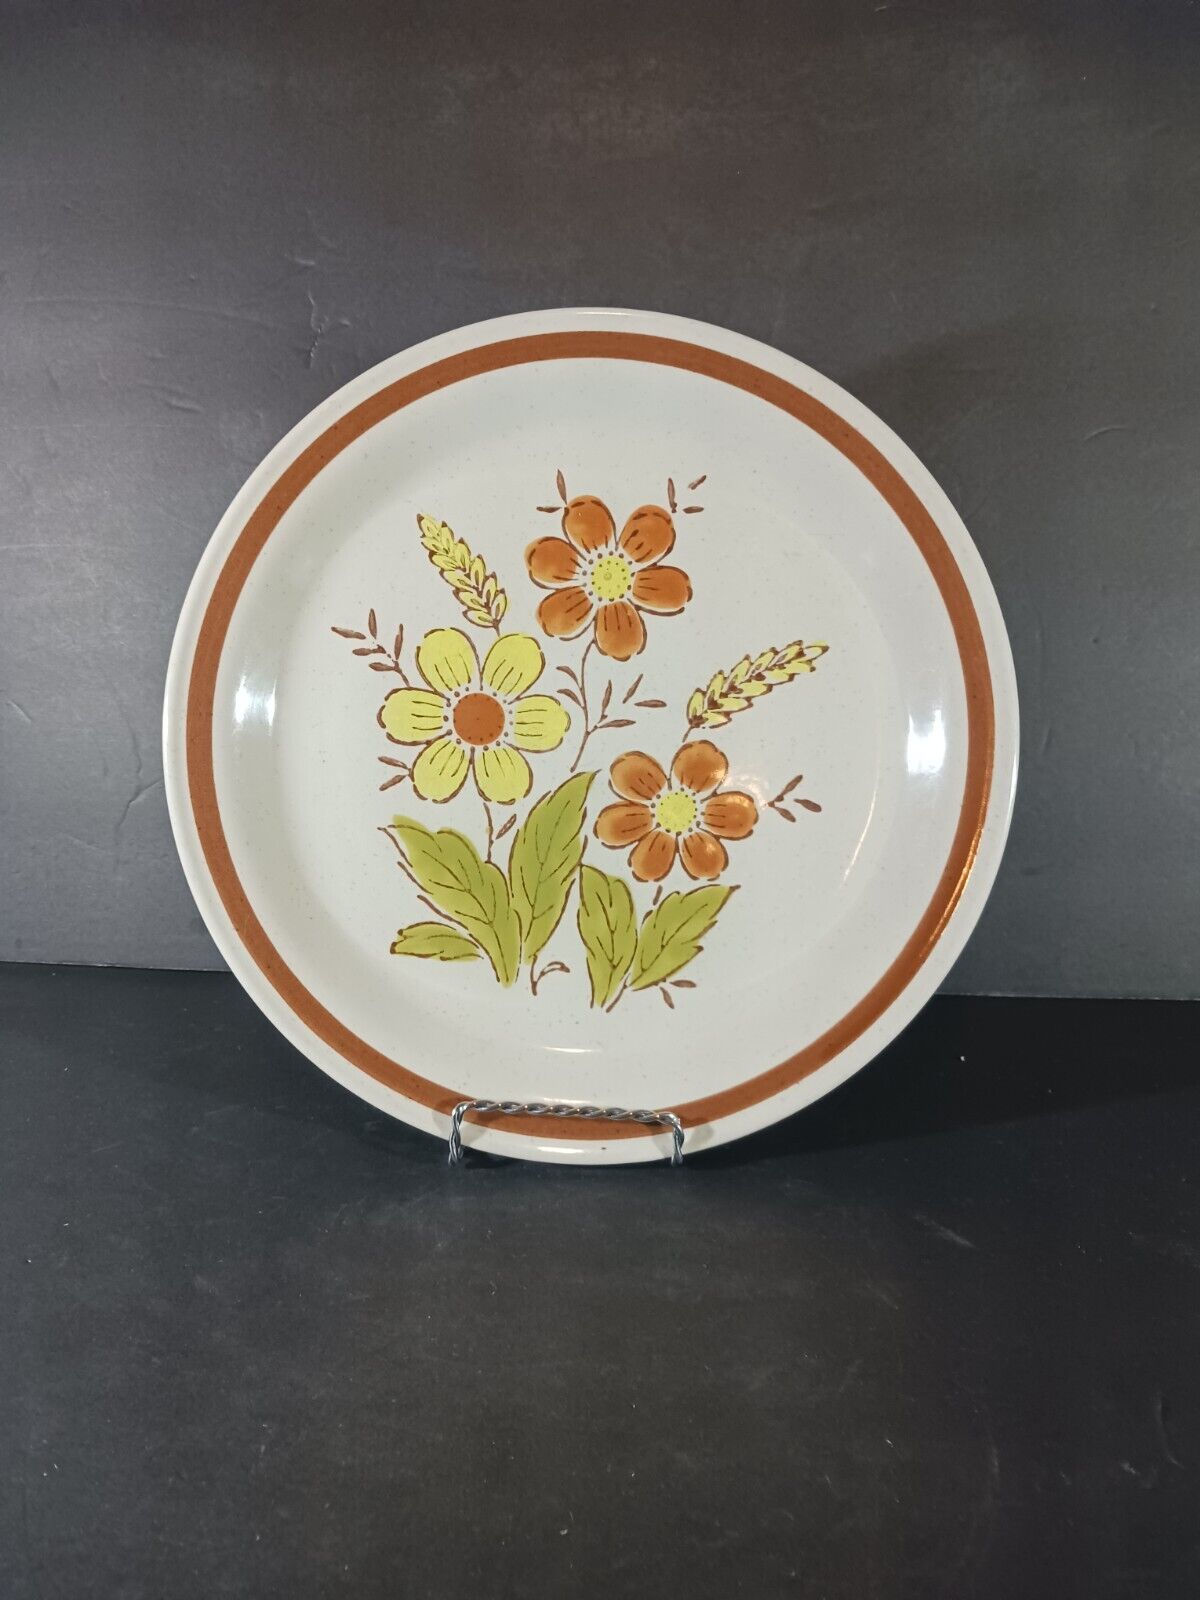 Primary image for AUTUMN COLLECTION WHEAT FLOWER Stoneware DINNER PLATE 10 1/2"